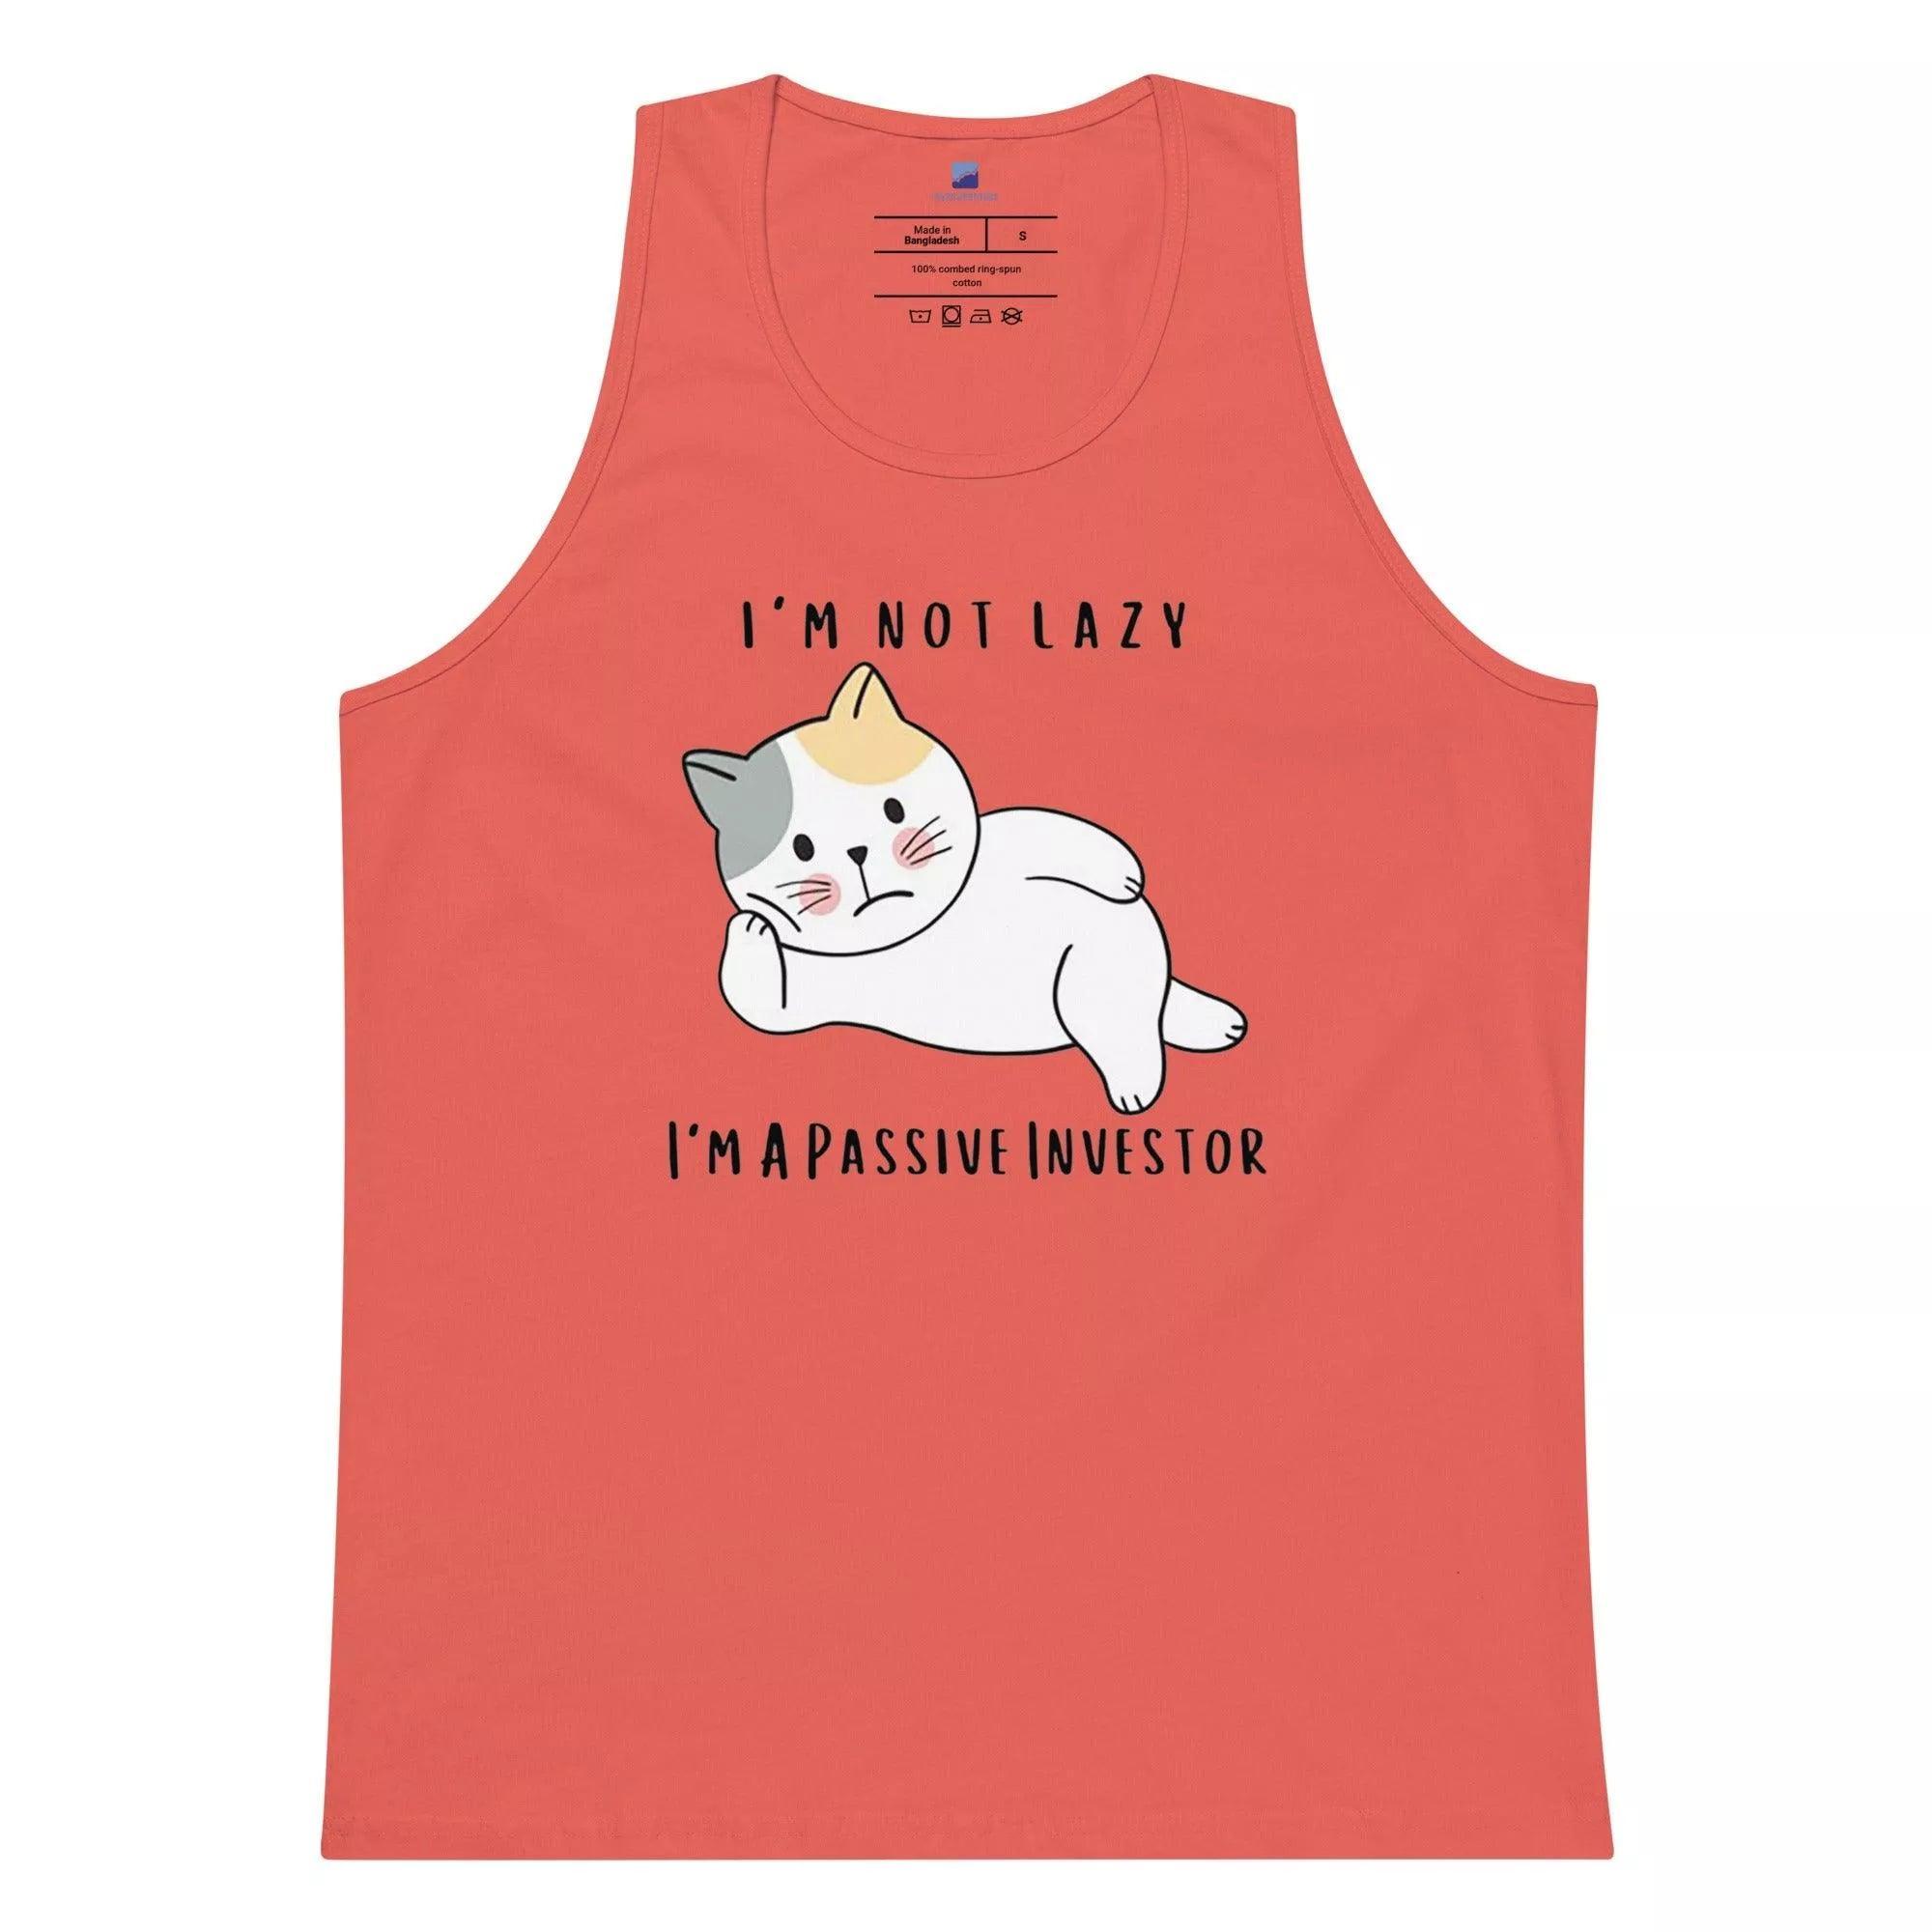 I'm A Passive Investor Tank Top - InvestmenTees